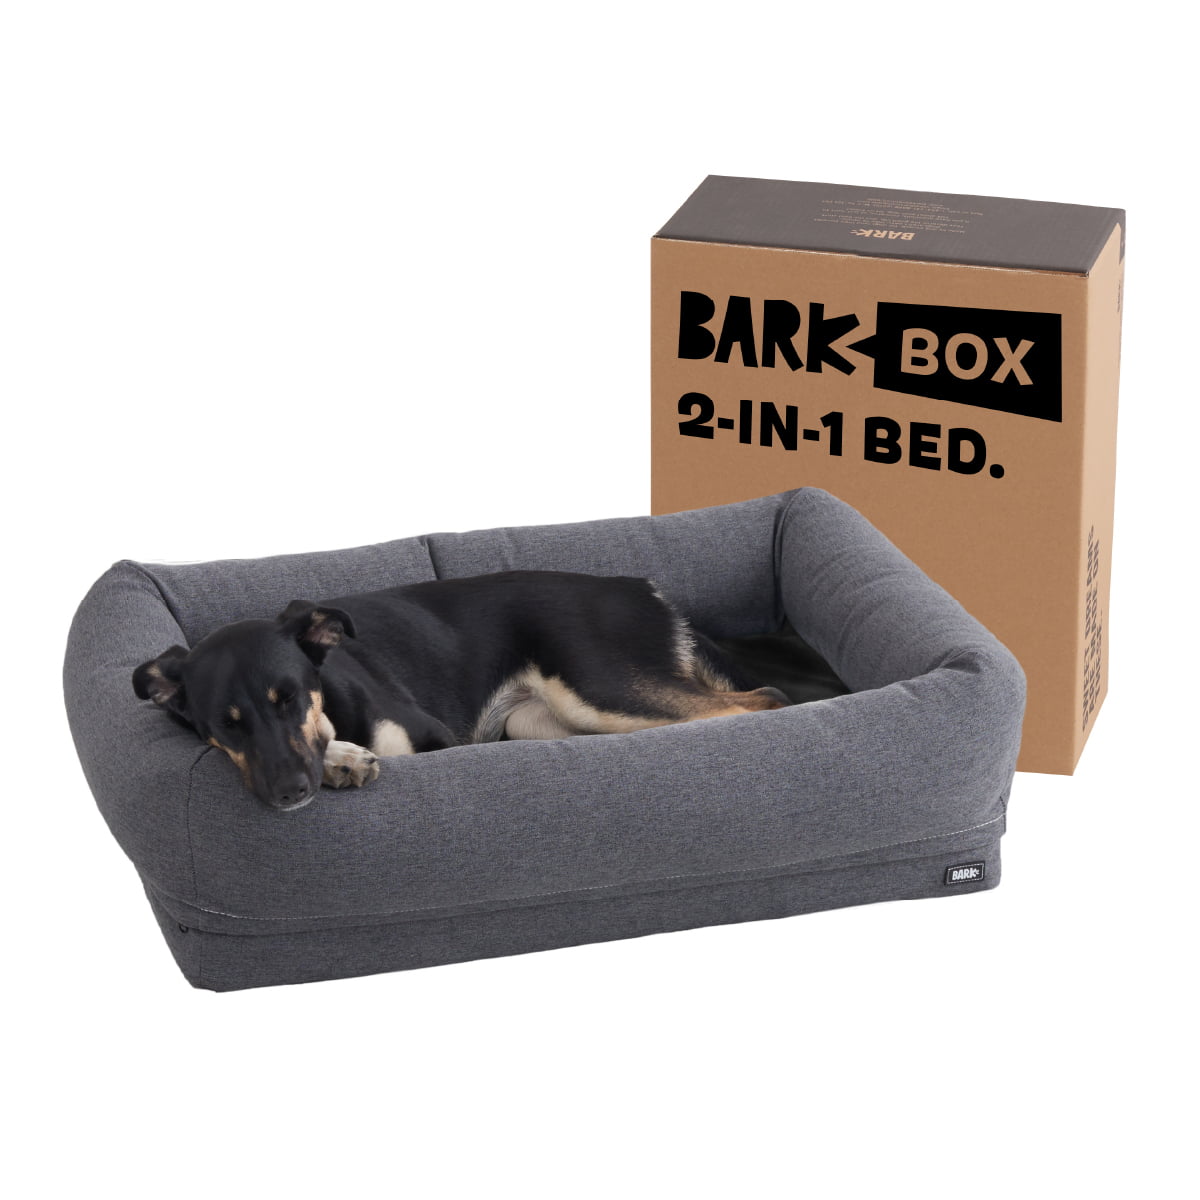 BARK 2-in-1 Memory Foam Cuddler Dog Bed | Plush Orthopedic Joint Relief Crate Lounger or Donut Pillow Bed， Machine Washable + Removable Cover | Waterproof Lining | Includes Toy